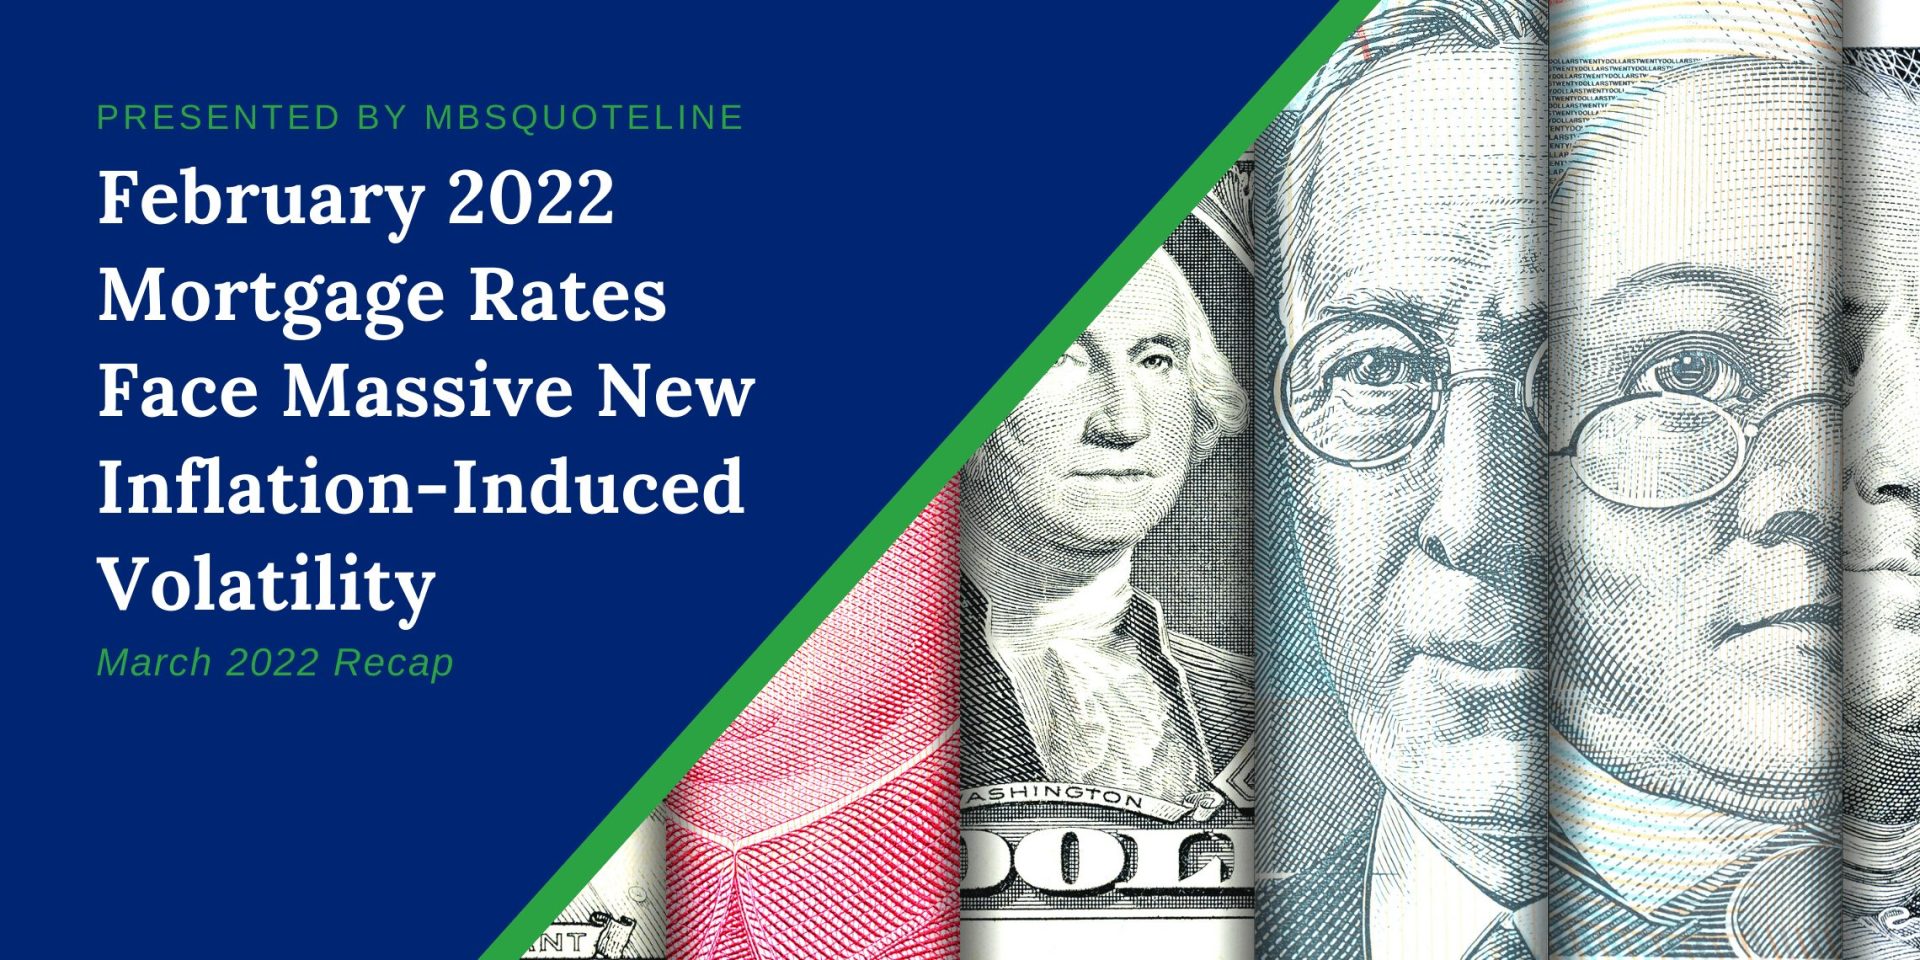 February 2022 Mortgage Rates Face Massive New Inflation-Induced Volatility Monthly Recap March 2022 MortgageTime MBSQuoteline